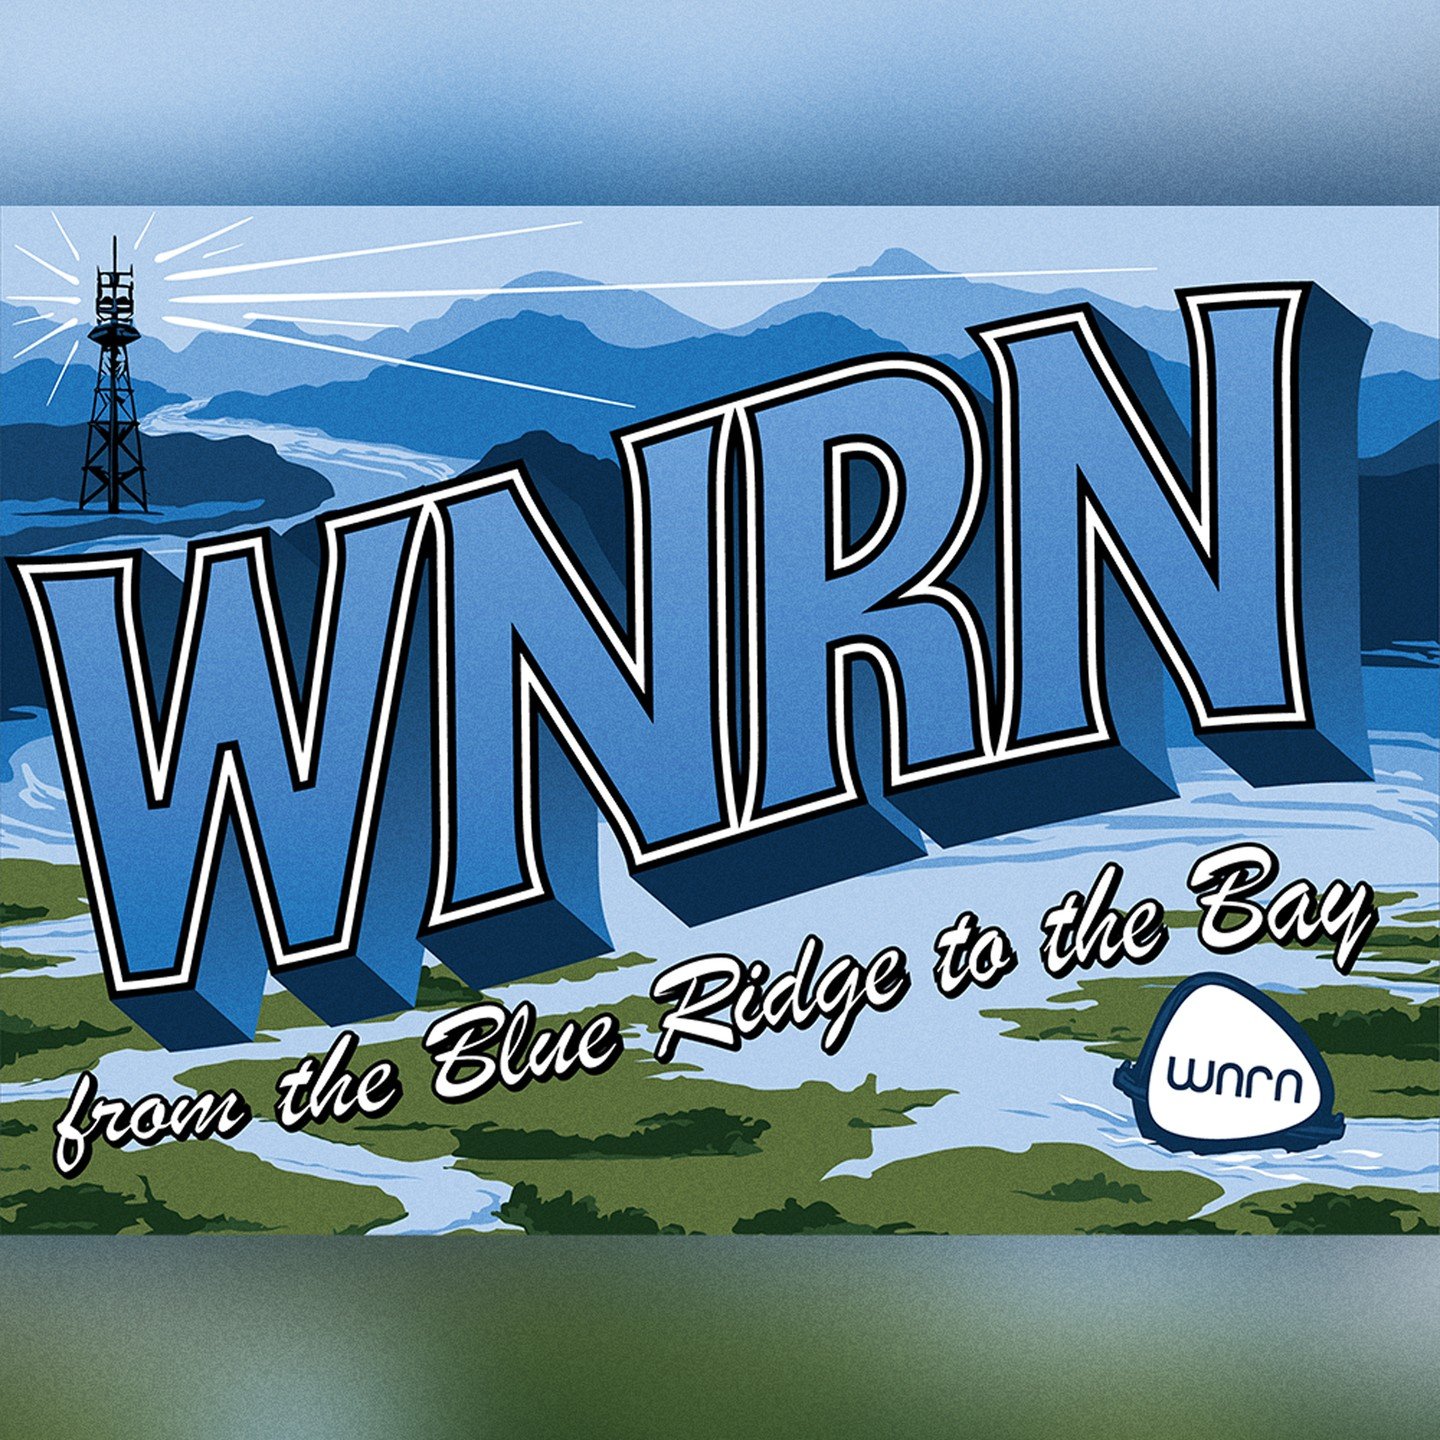 I love working with the truly awesome folks at @wnrnradio to make great designs! They play grate hunks of rockin tunage as well as spreading the good word about awesome non-profit Virginia organizations. Also, they are wonderful people. That makes th